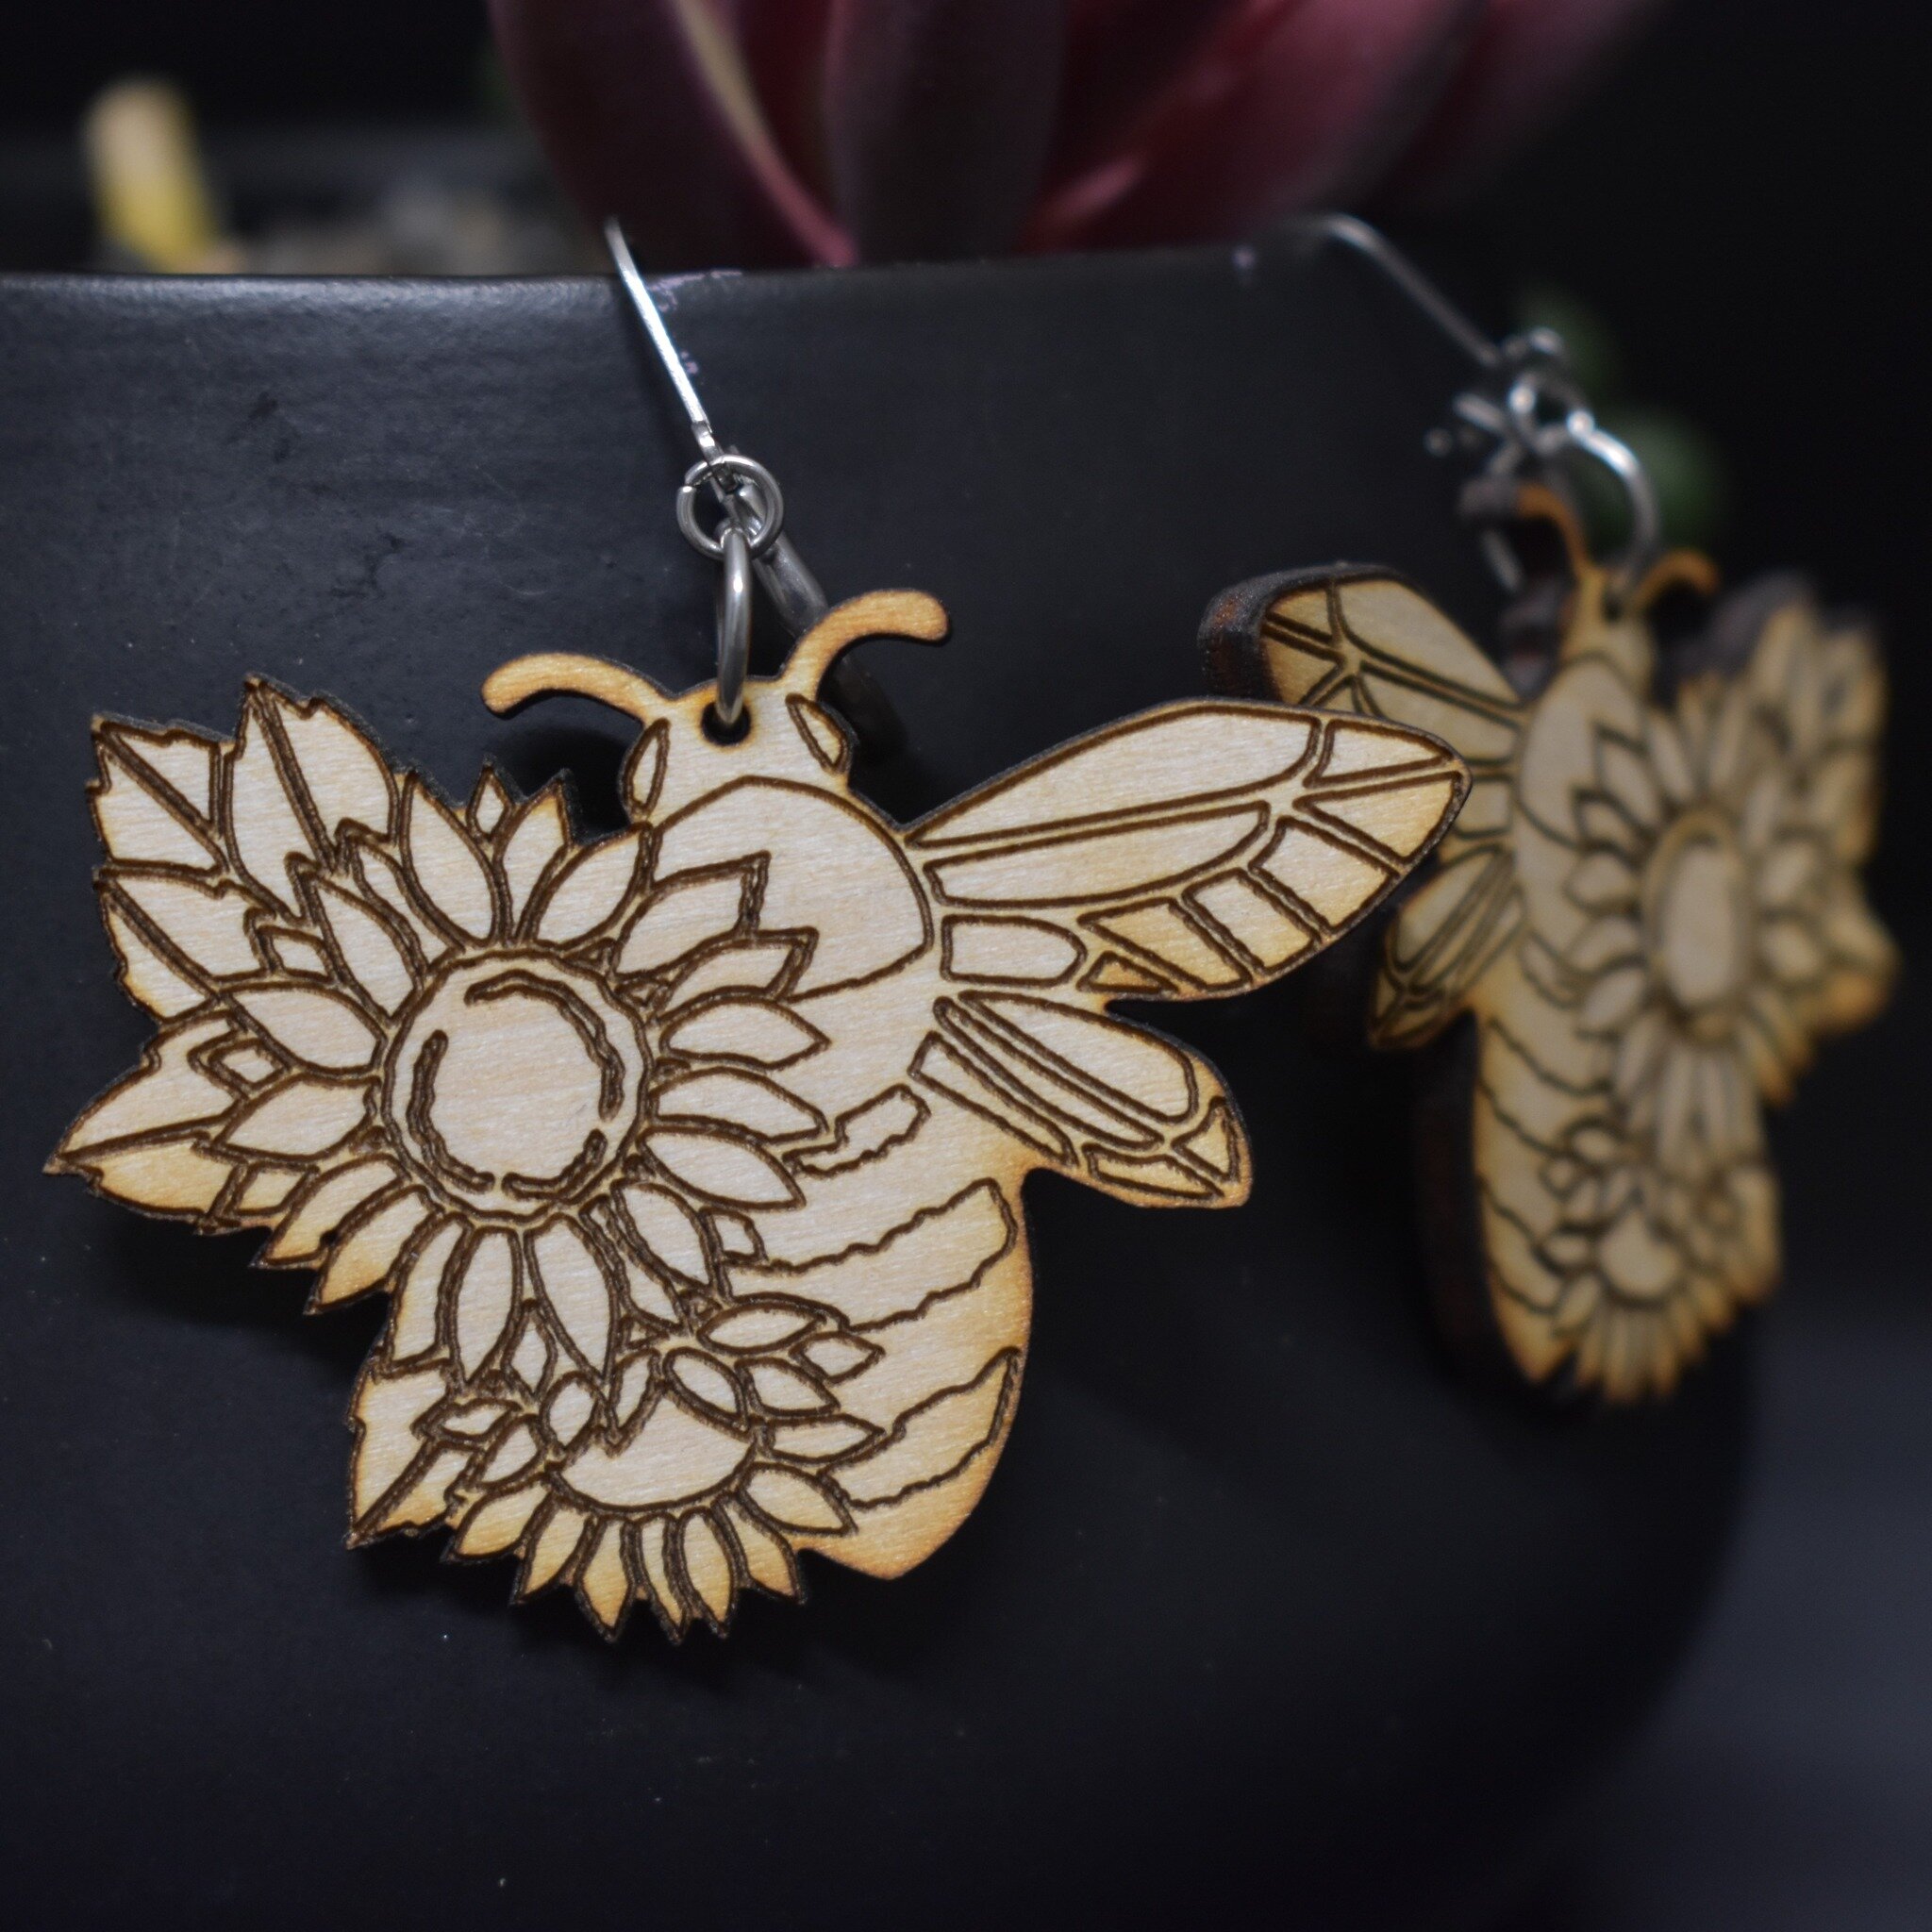 I have 3 pairs of these floral bee earrings in stock and ready to ship. #woodenearringsforsale #woodearringset #woodearringsforsale #beeearring #beeflowers #floralbee #floralbeedesign #momownedcompany #shoplocalcoloradobusiness #coloradosmallbusiness